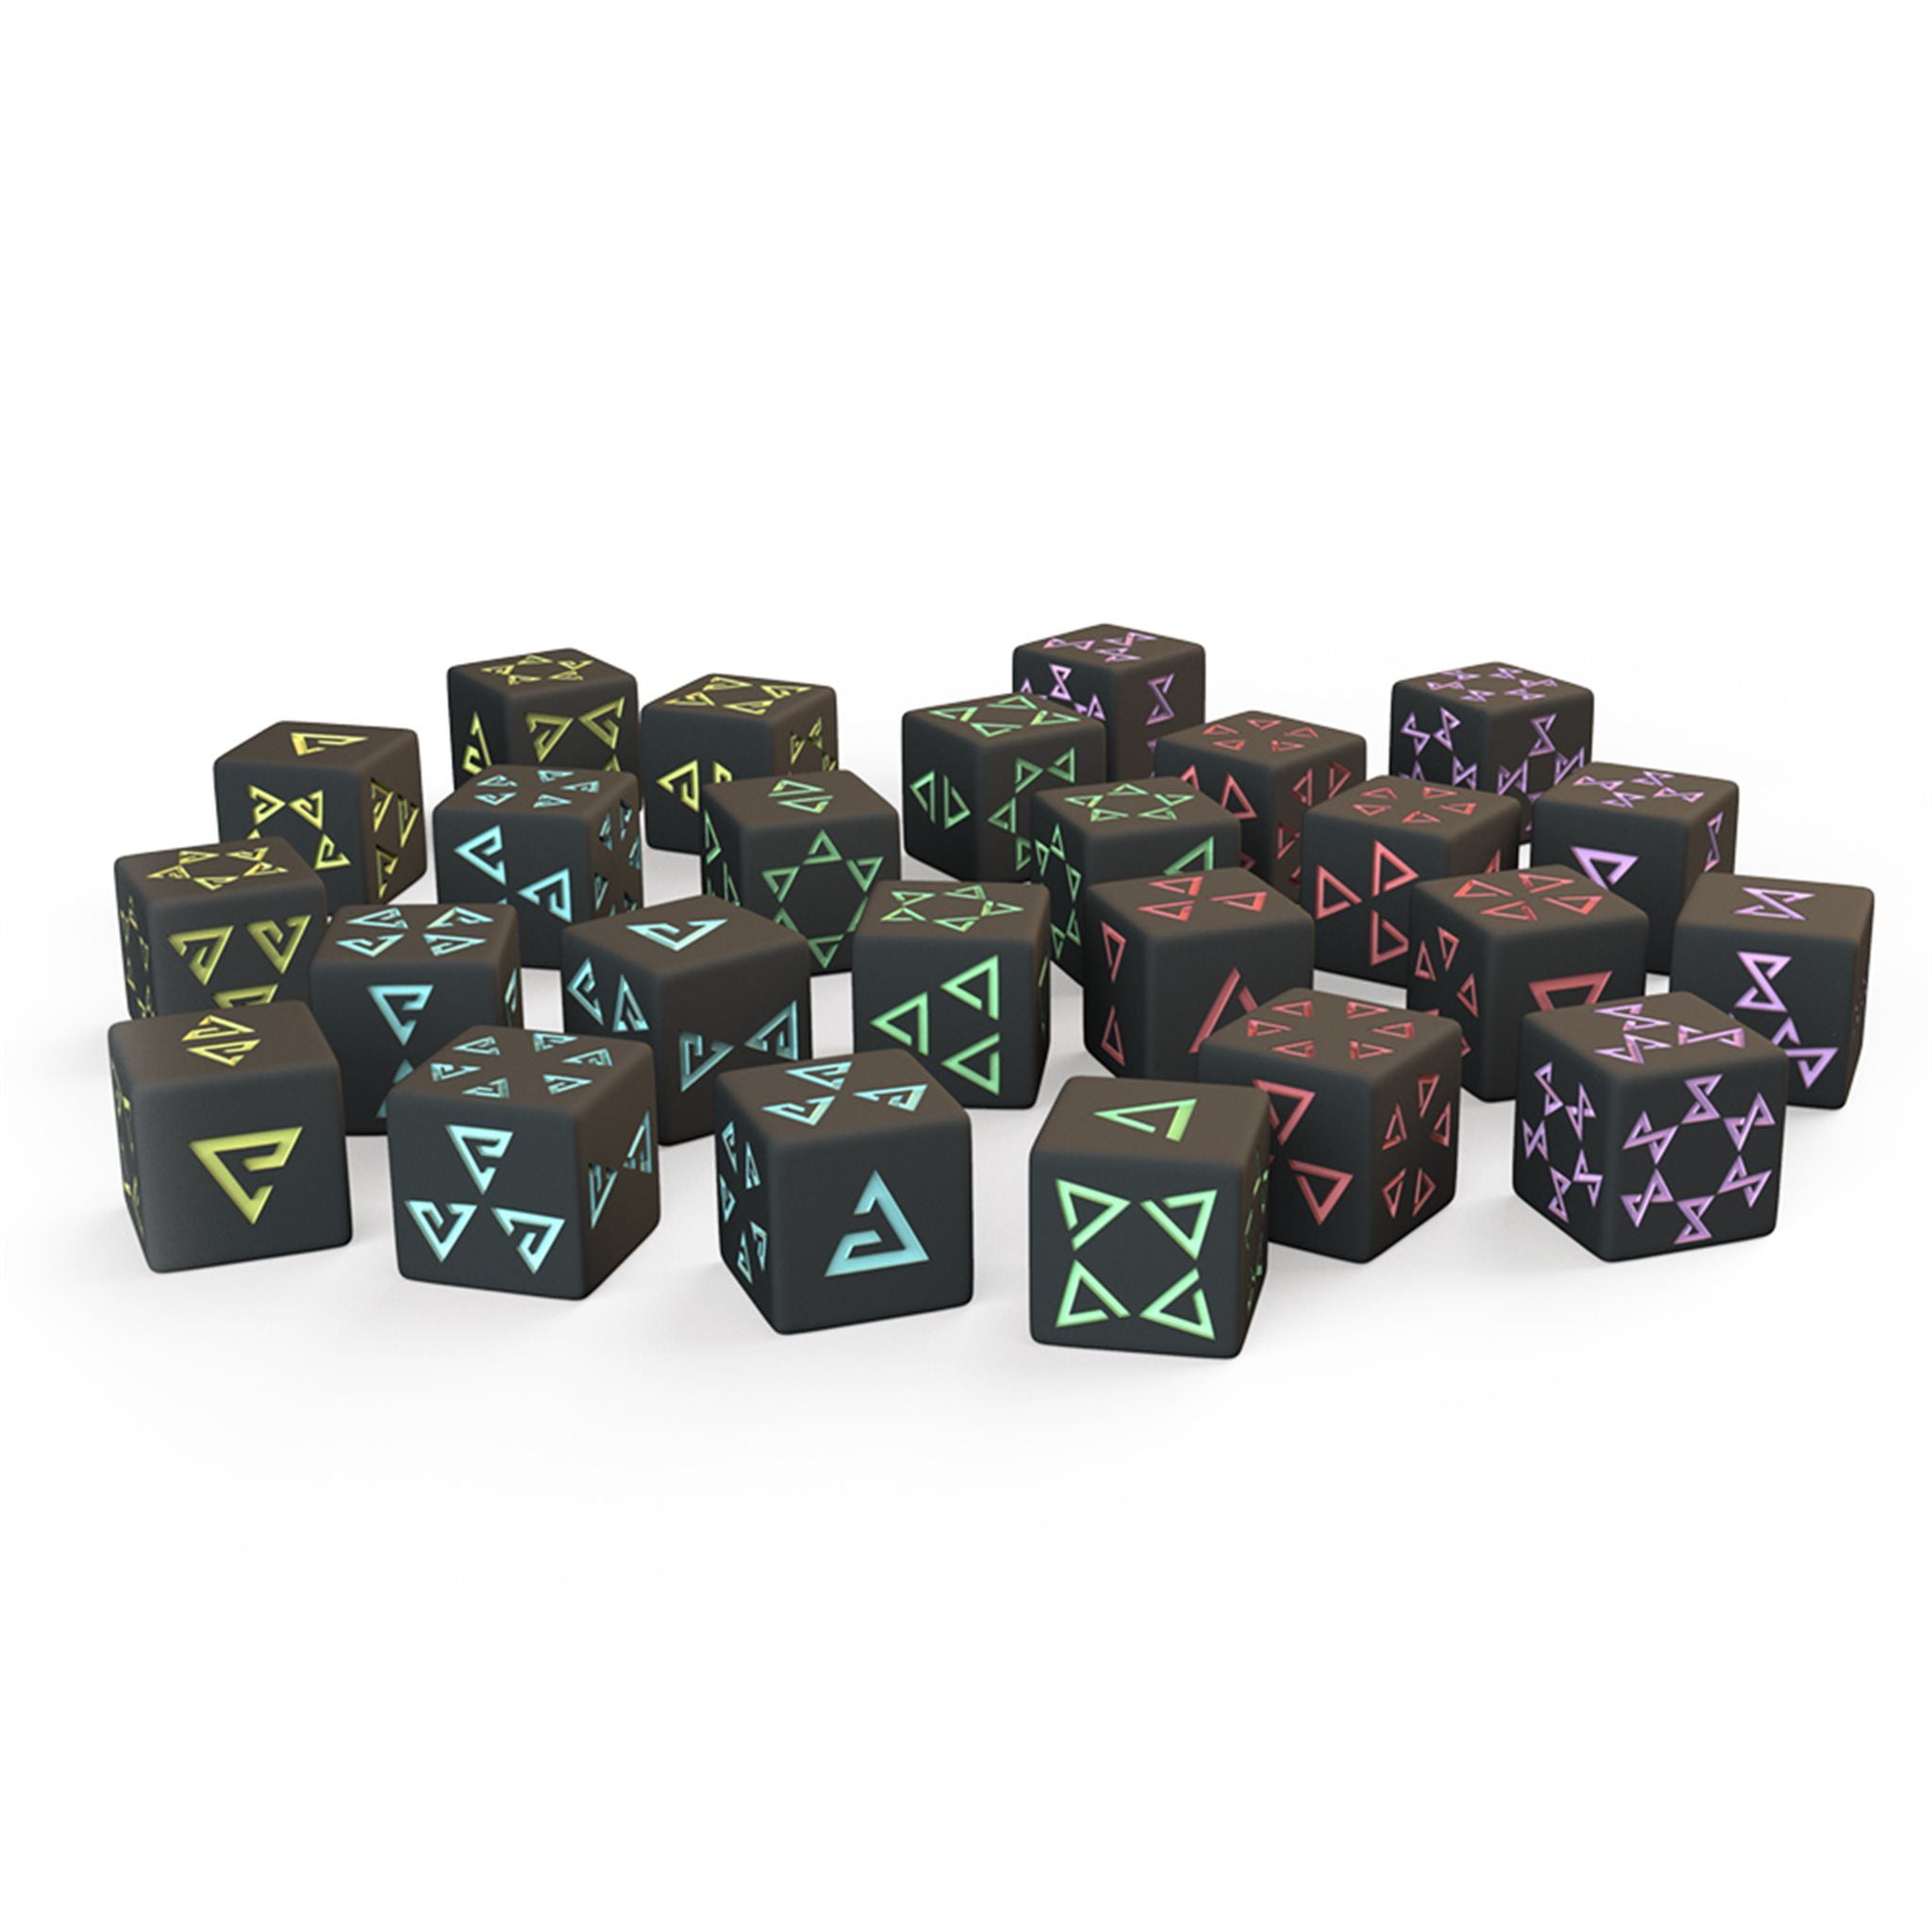 Additional dice set: The Witcher: Old World